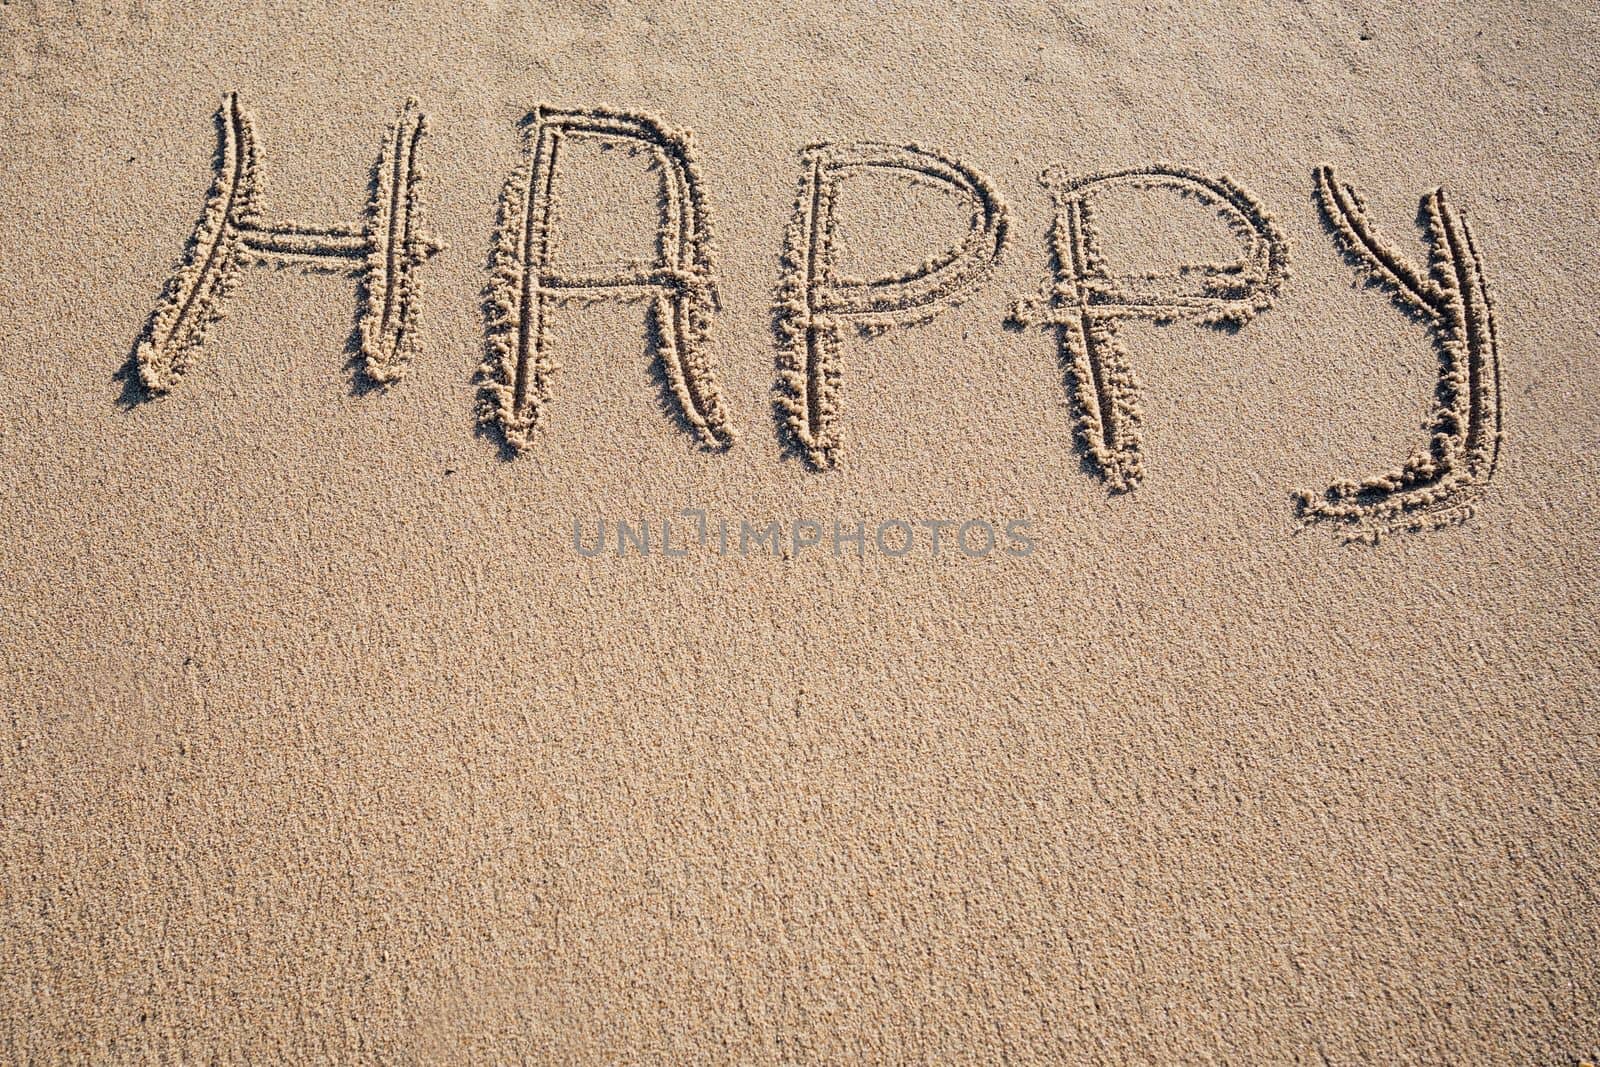 Happy word written on sand. Travel summer beach vacation concept by papatonic